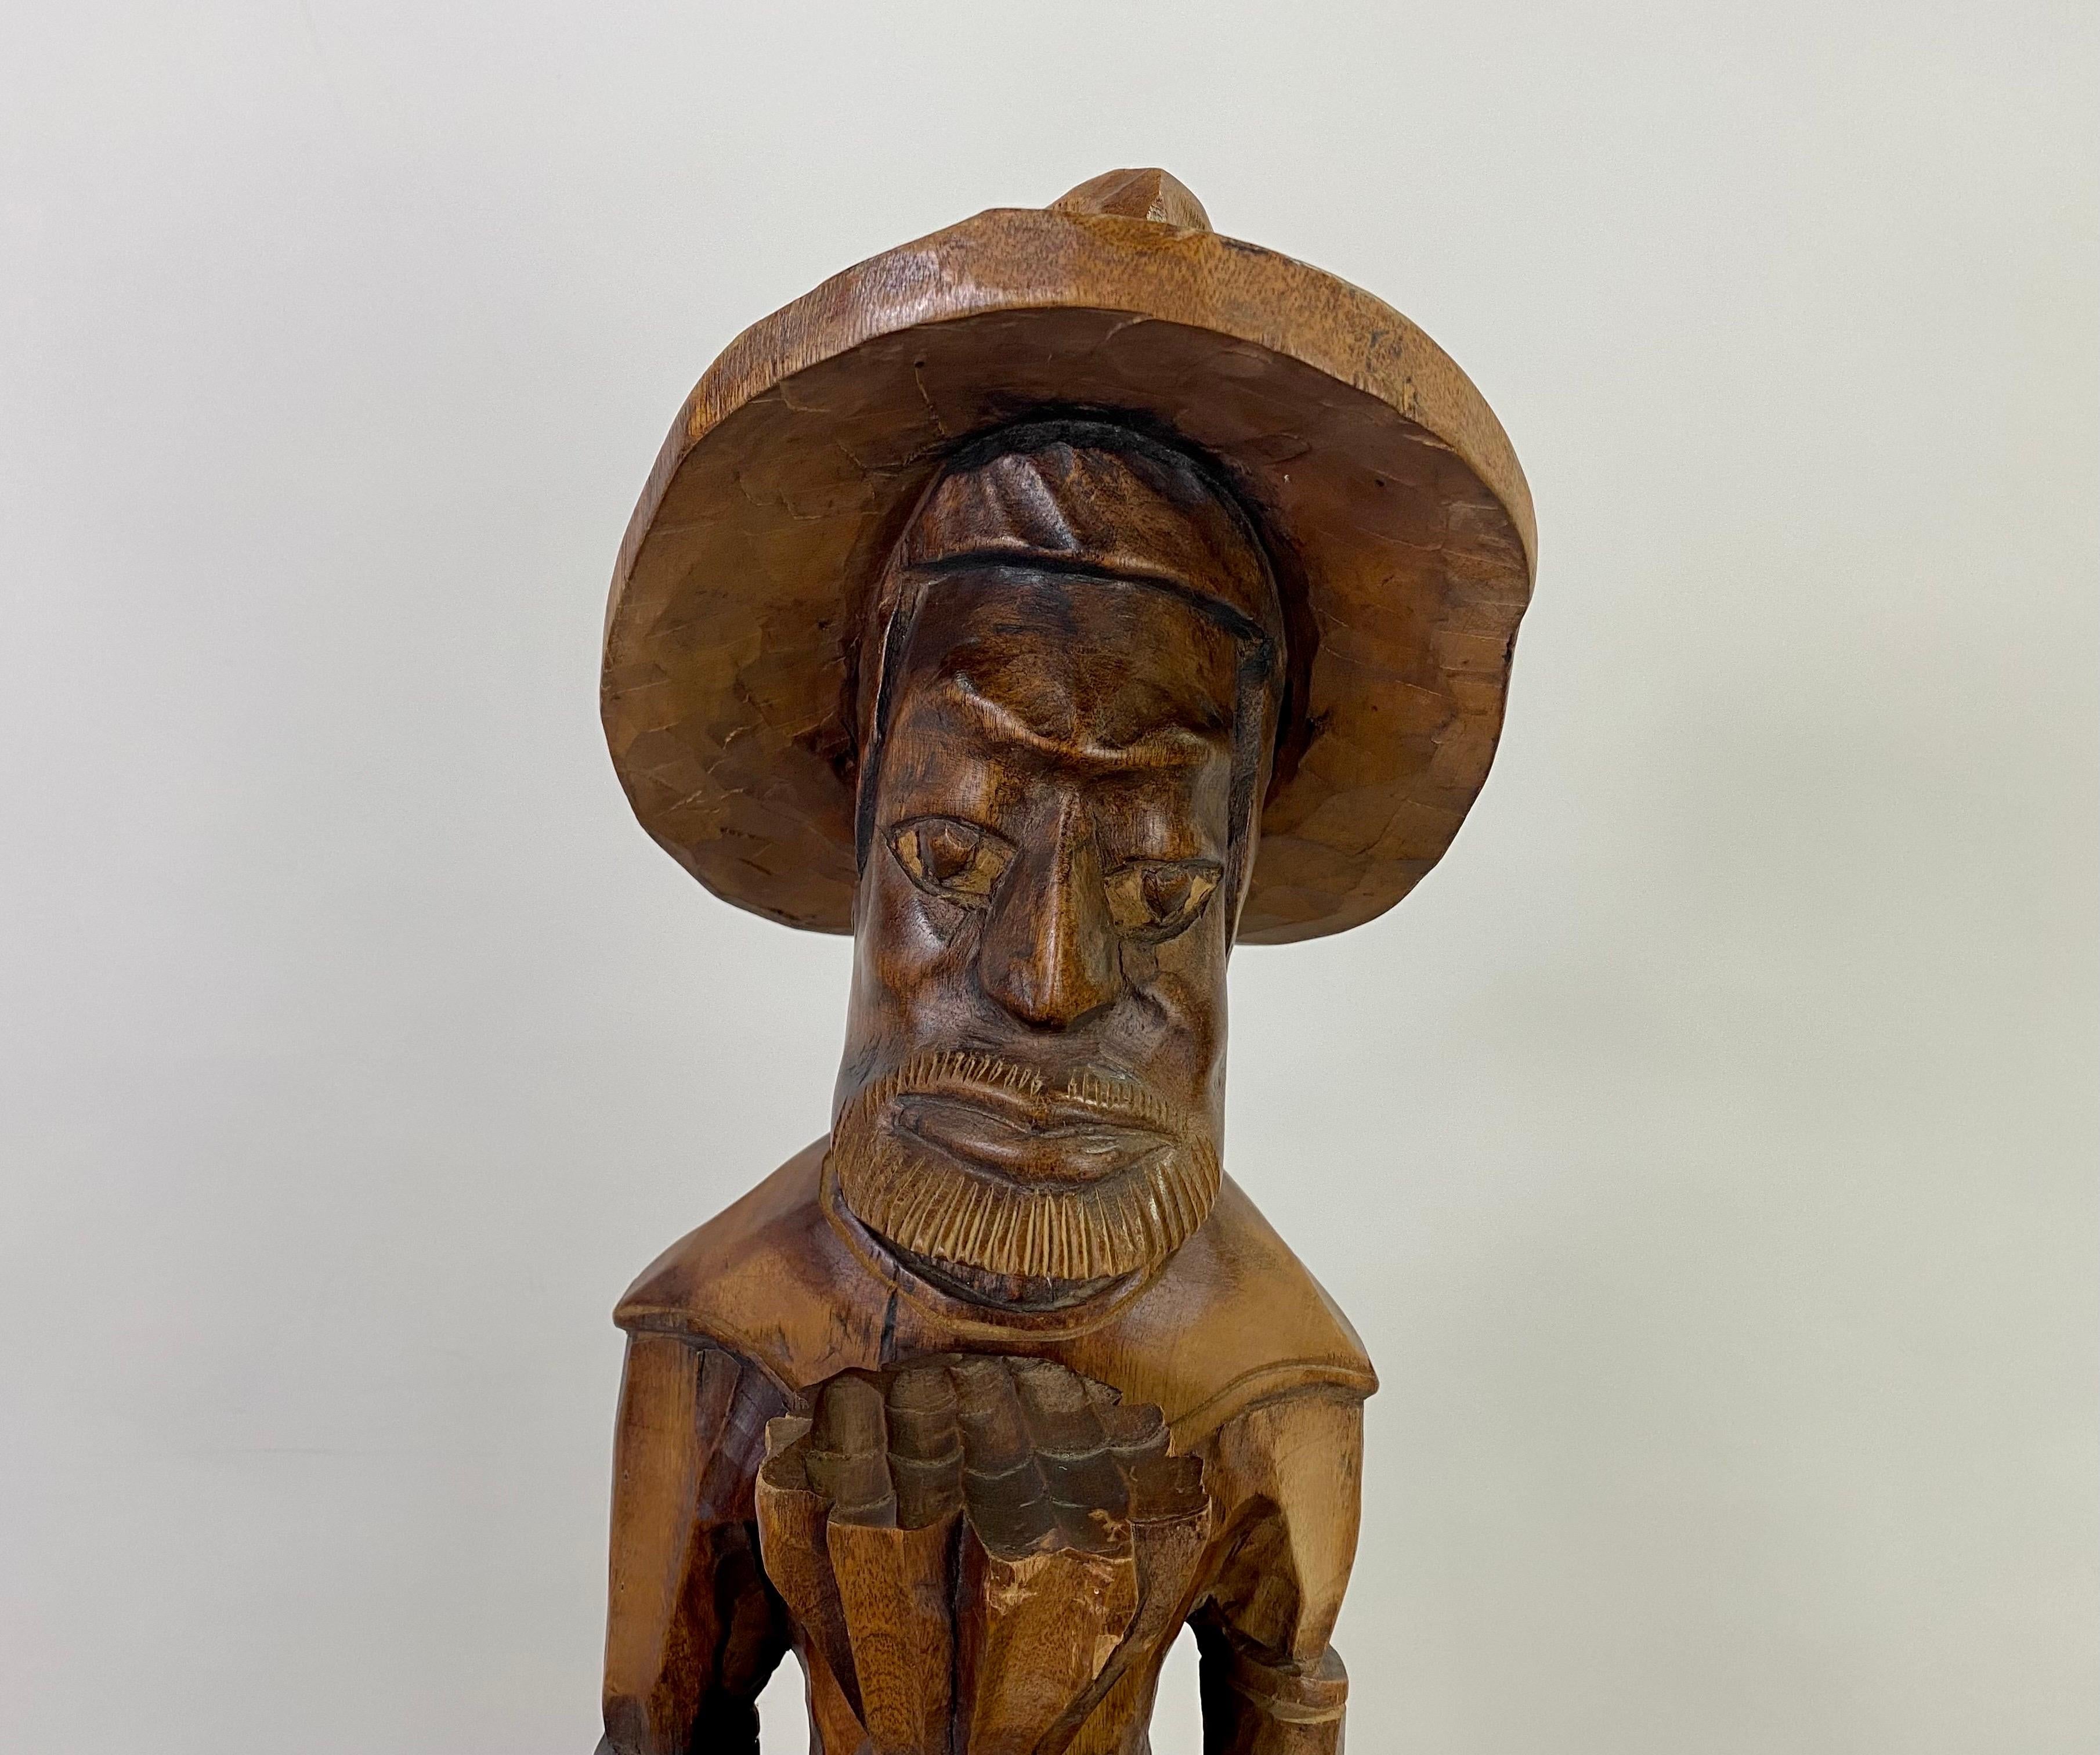 A vintage Mid-Century period Folk art sculpture of a man standing tall.  The sculpture is finely carved of quality wood and depicts a Caribbean farmer man wearing a hat, holding a pineapple with one hand and an umbrella in the other hand. 